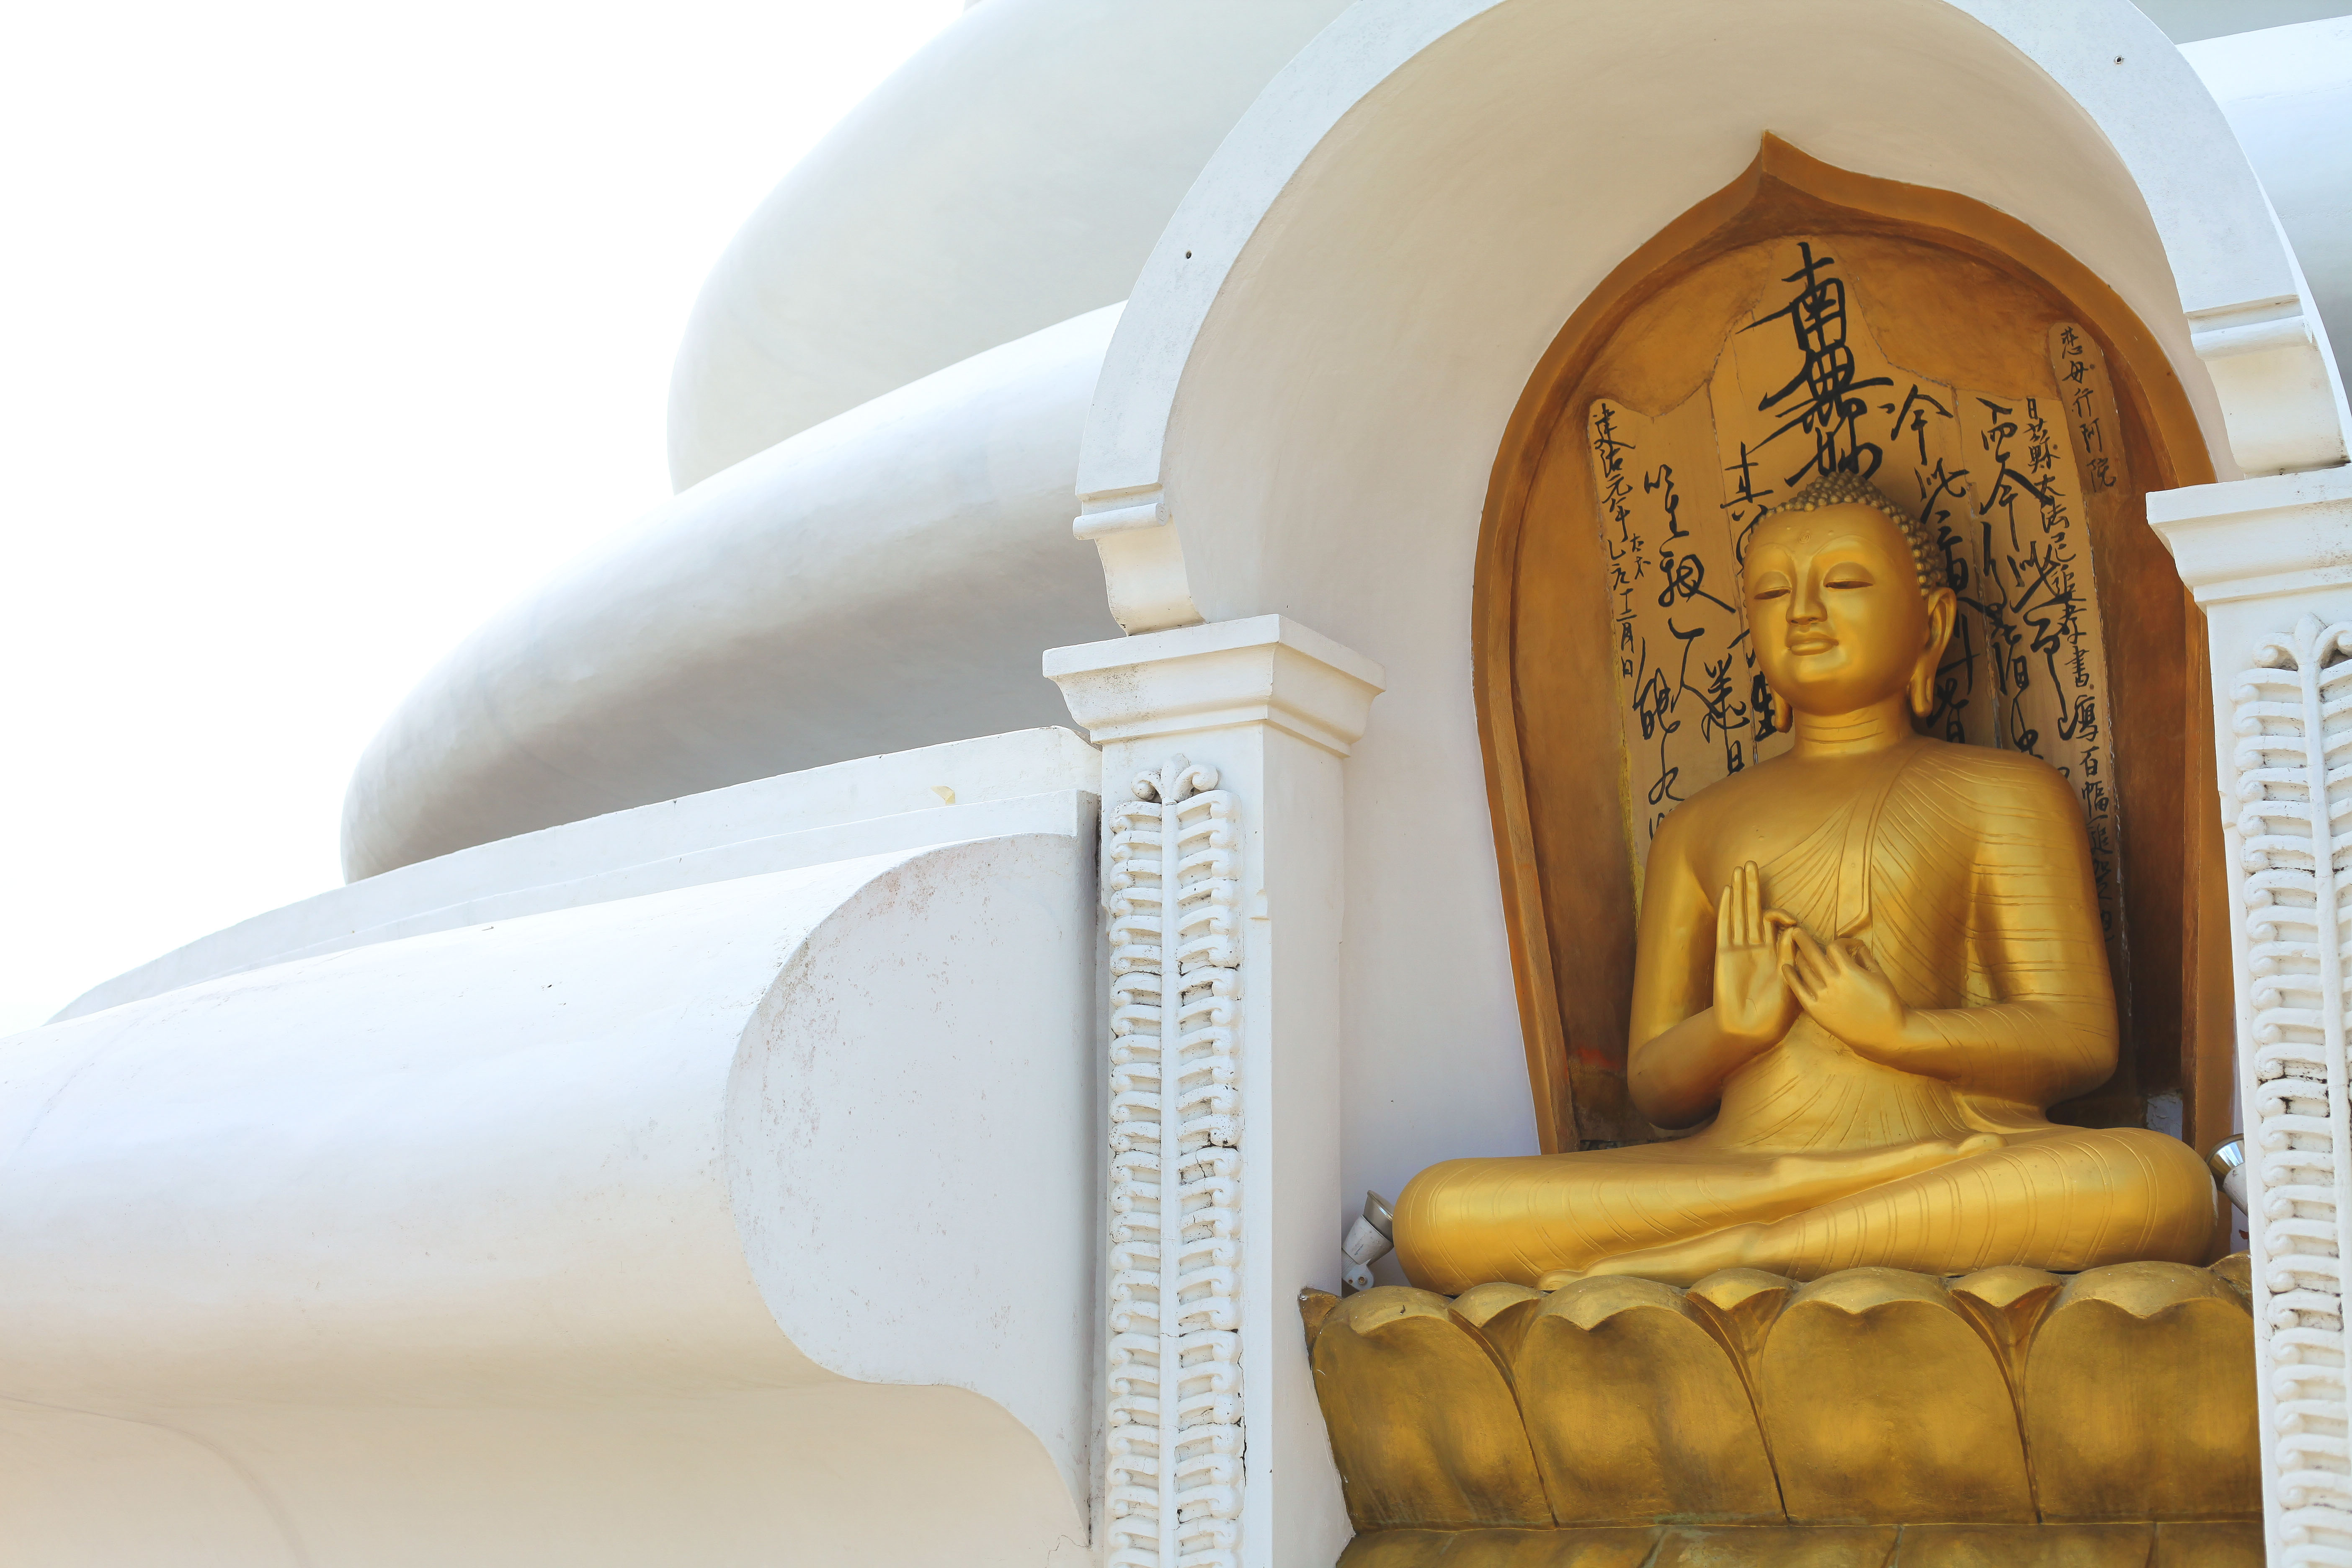 A Peace Pagoda is a Buddhist stupa - a monument to inspire peace and serenity. Photo: Charlie Malmqvist.